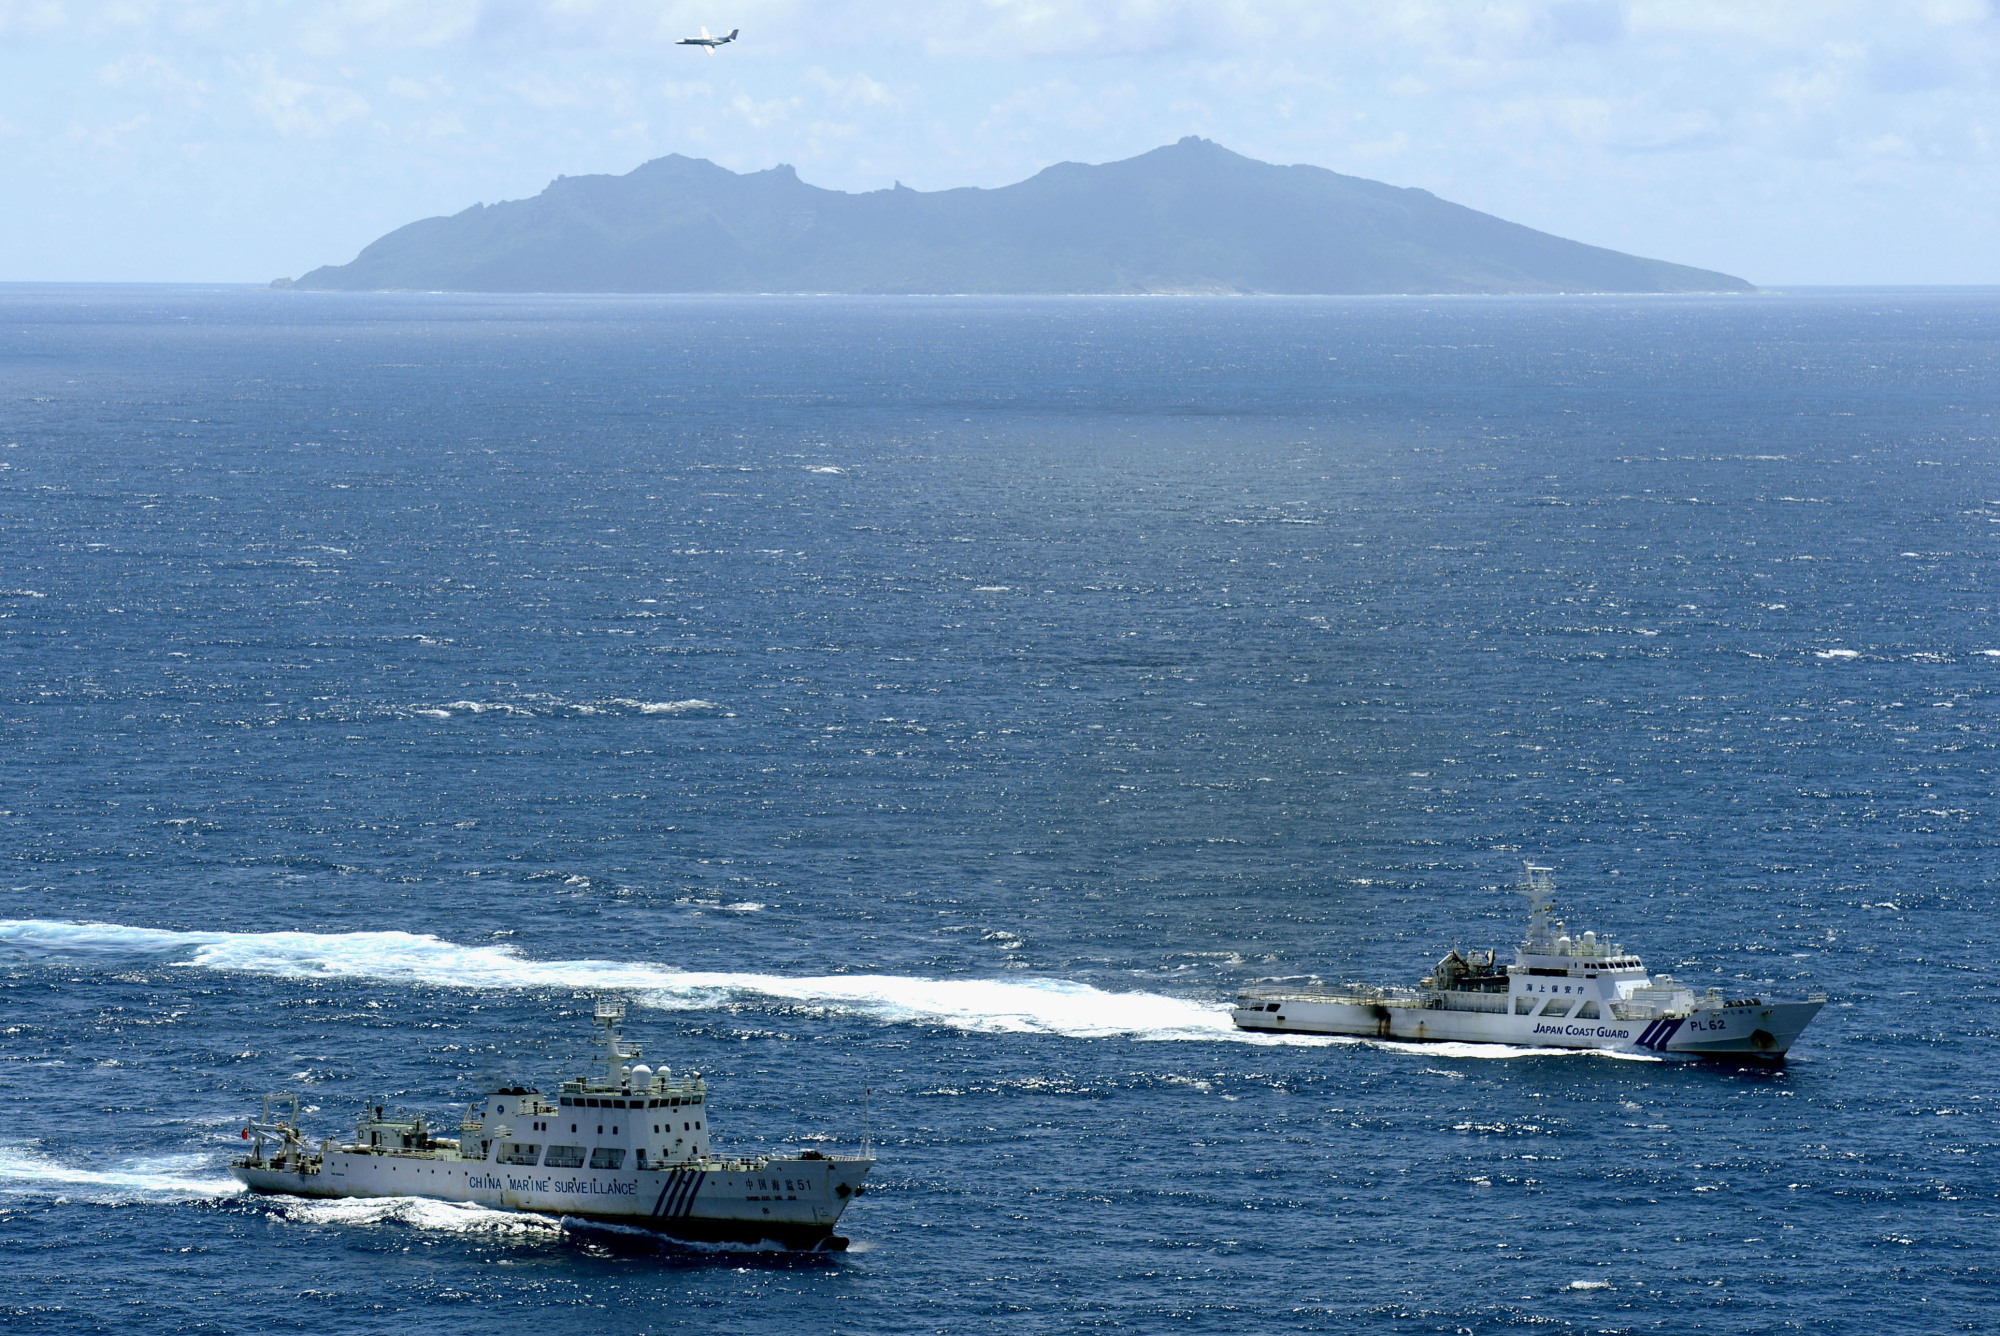 A Japan Coast Guard ship (right) and a Chinese surveillance ship sail in Japanese waters off the northeastern coast of Uotsuri, one of the five main islets in the Senkaku Islands chain, on Sept. 14, 2012. The territorial dispute has been a flash point in Japan-China relations since 2012 when the Japanese government nationalized the uninhabited islets. | KYODO